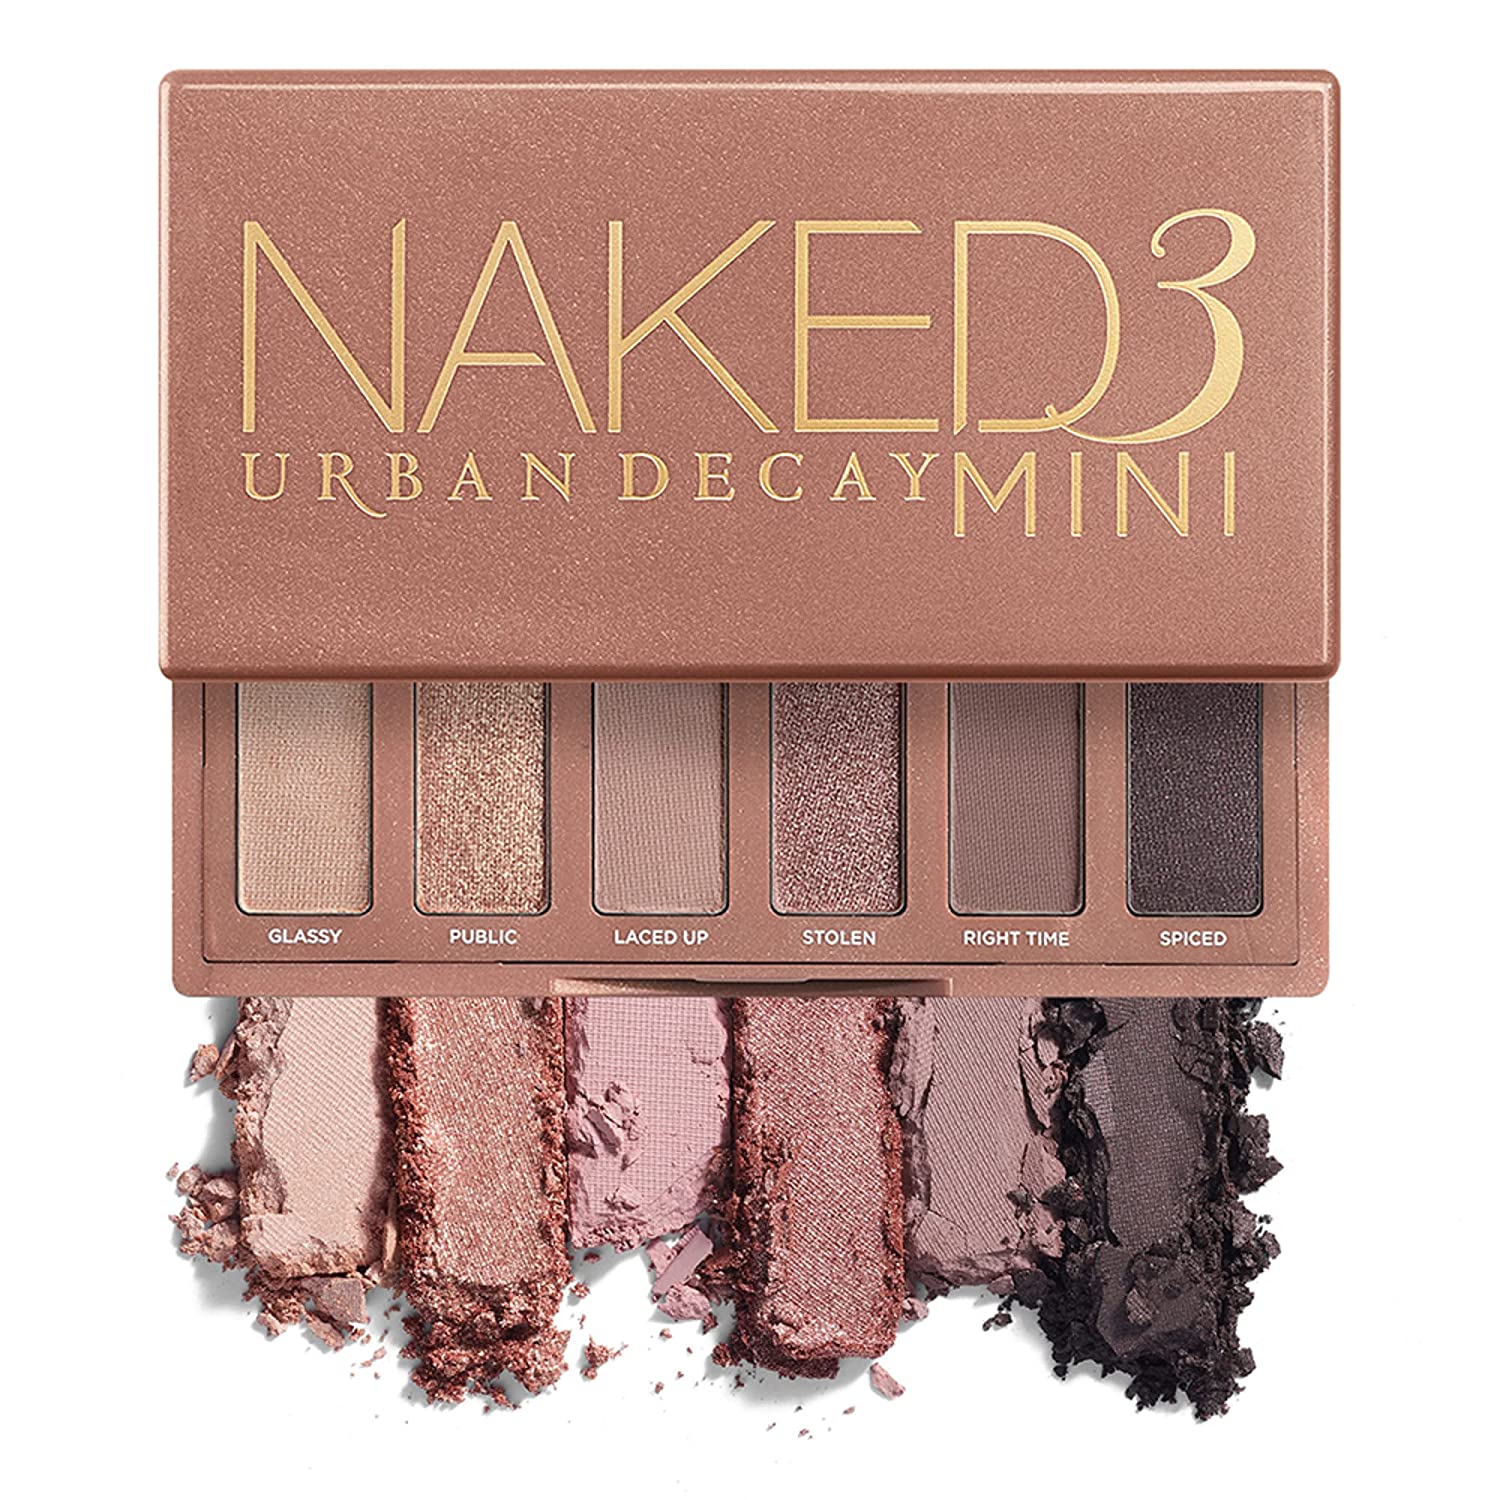 Loreal Professionnel Urban Decay Naked3 Mini Eyeshadow Palette - Pigmented Eye Makeup Palette for Travel - Ultra Mixable - Up to 12 Hours of Comfort